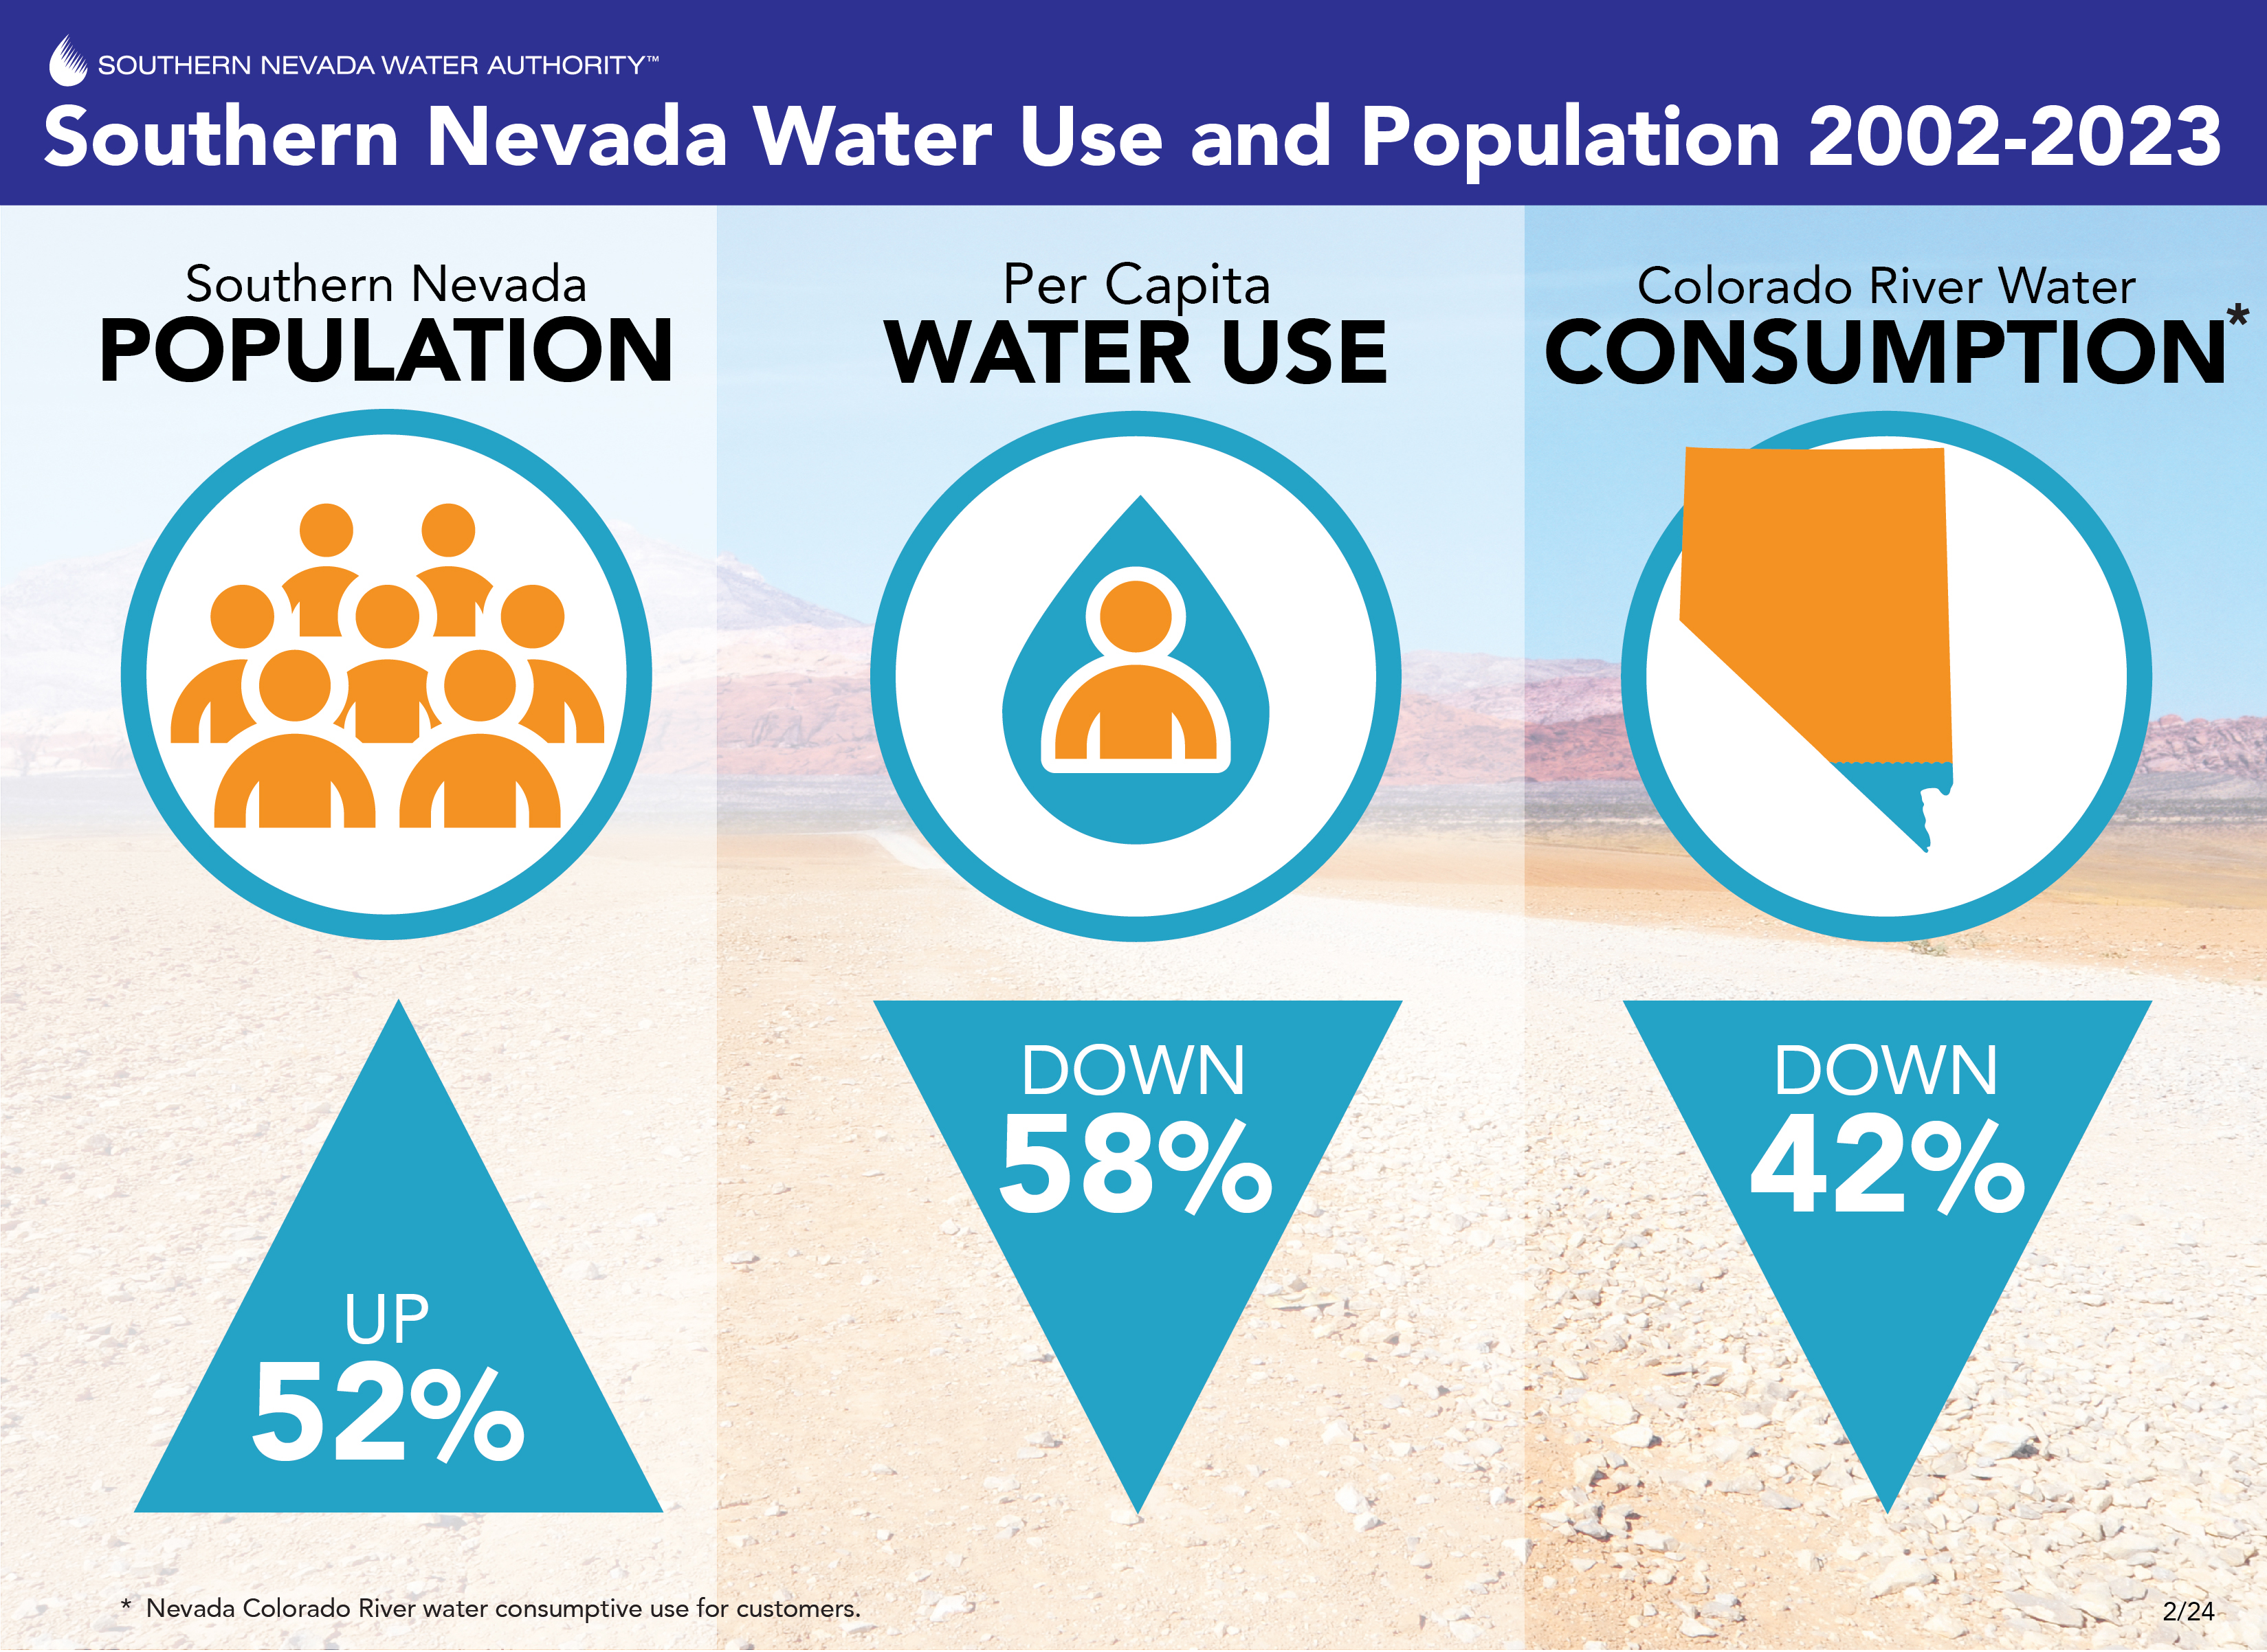 Graphic says that 2002-2023 southern nevada population is up 52 percent but per capita water use is don 58% and colorado river water consumption is down 42 percent